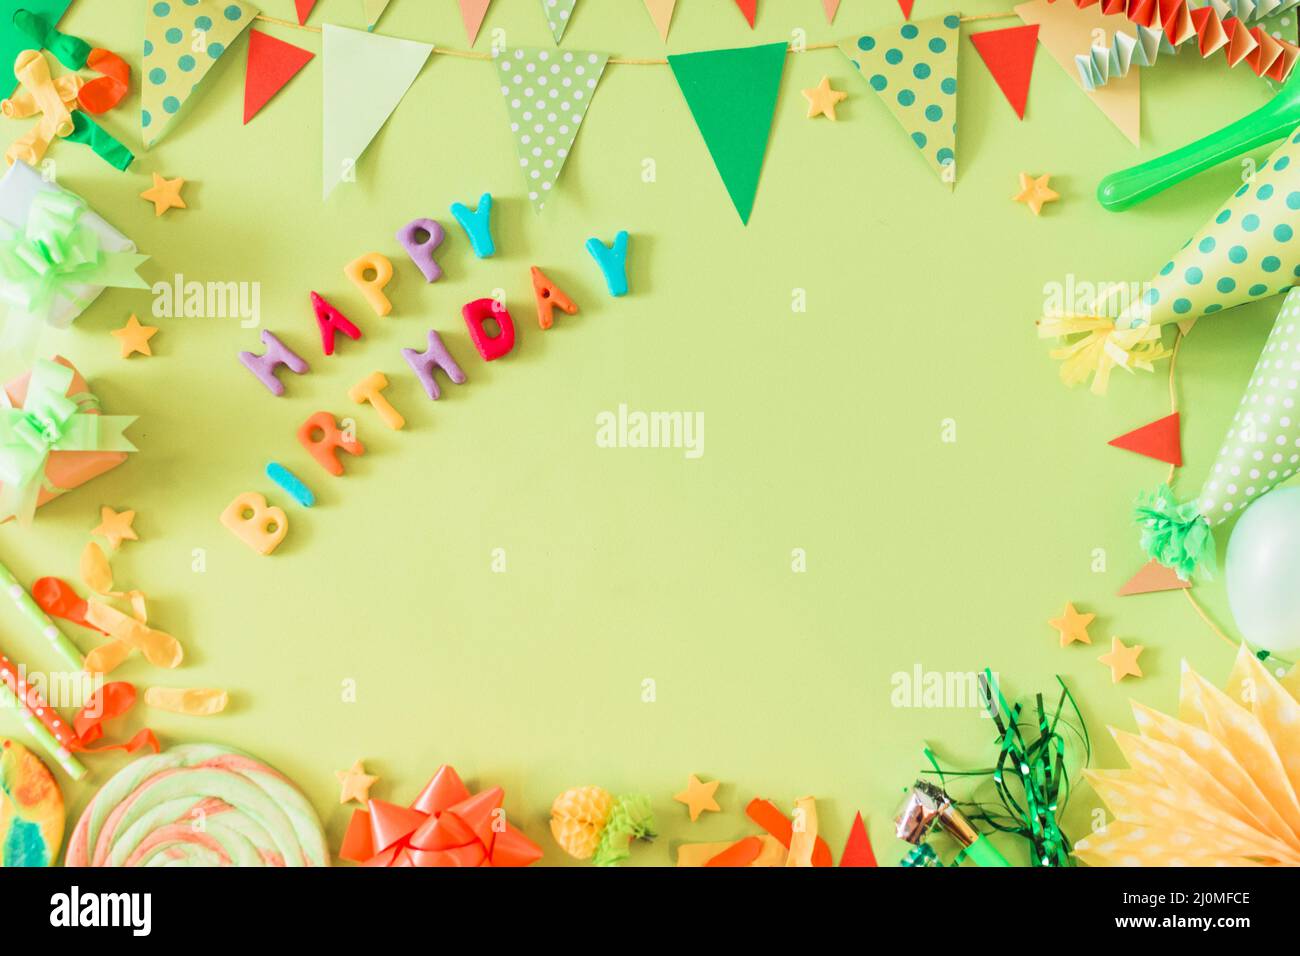 Happy birthday text with accessories green background Stock Photo - Alamy